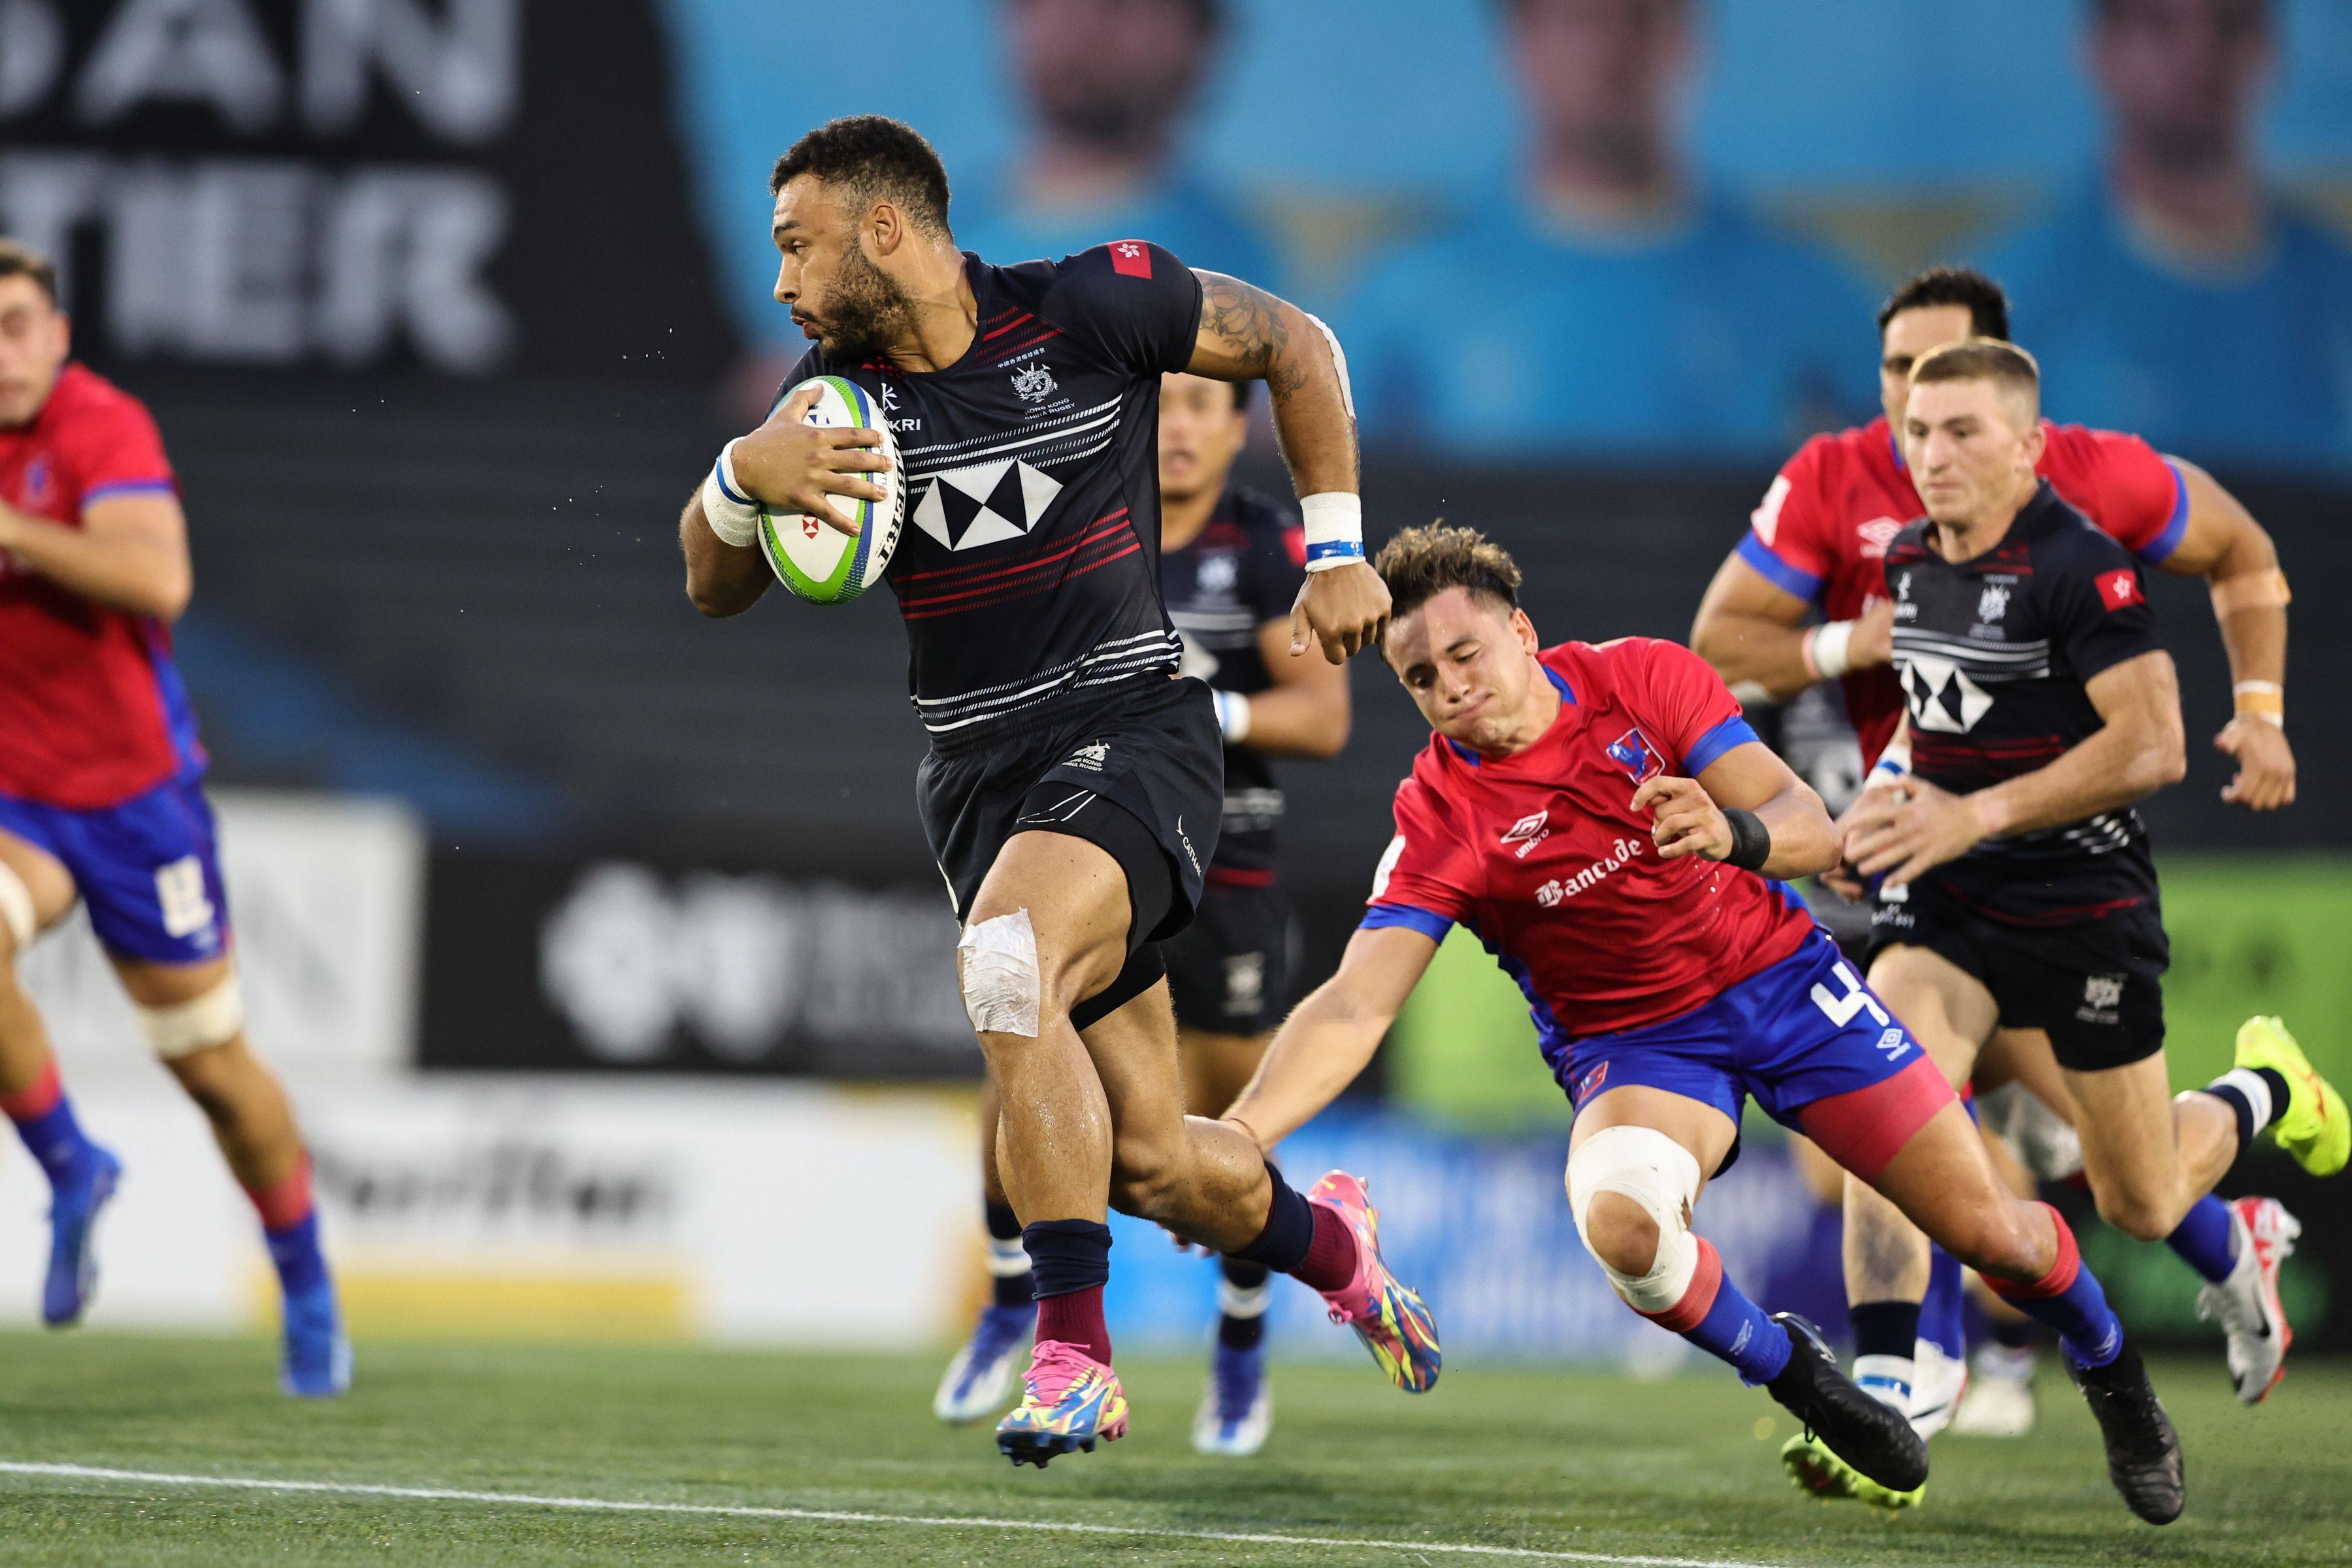 Max Denmark crossed twice in Hong Kong’s semi-final against Germany, but still finished on the losing side. Photo: World Rugby